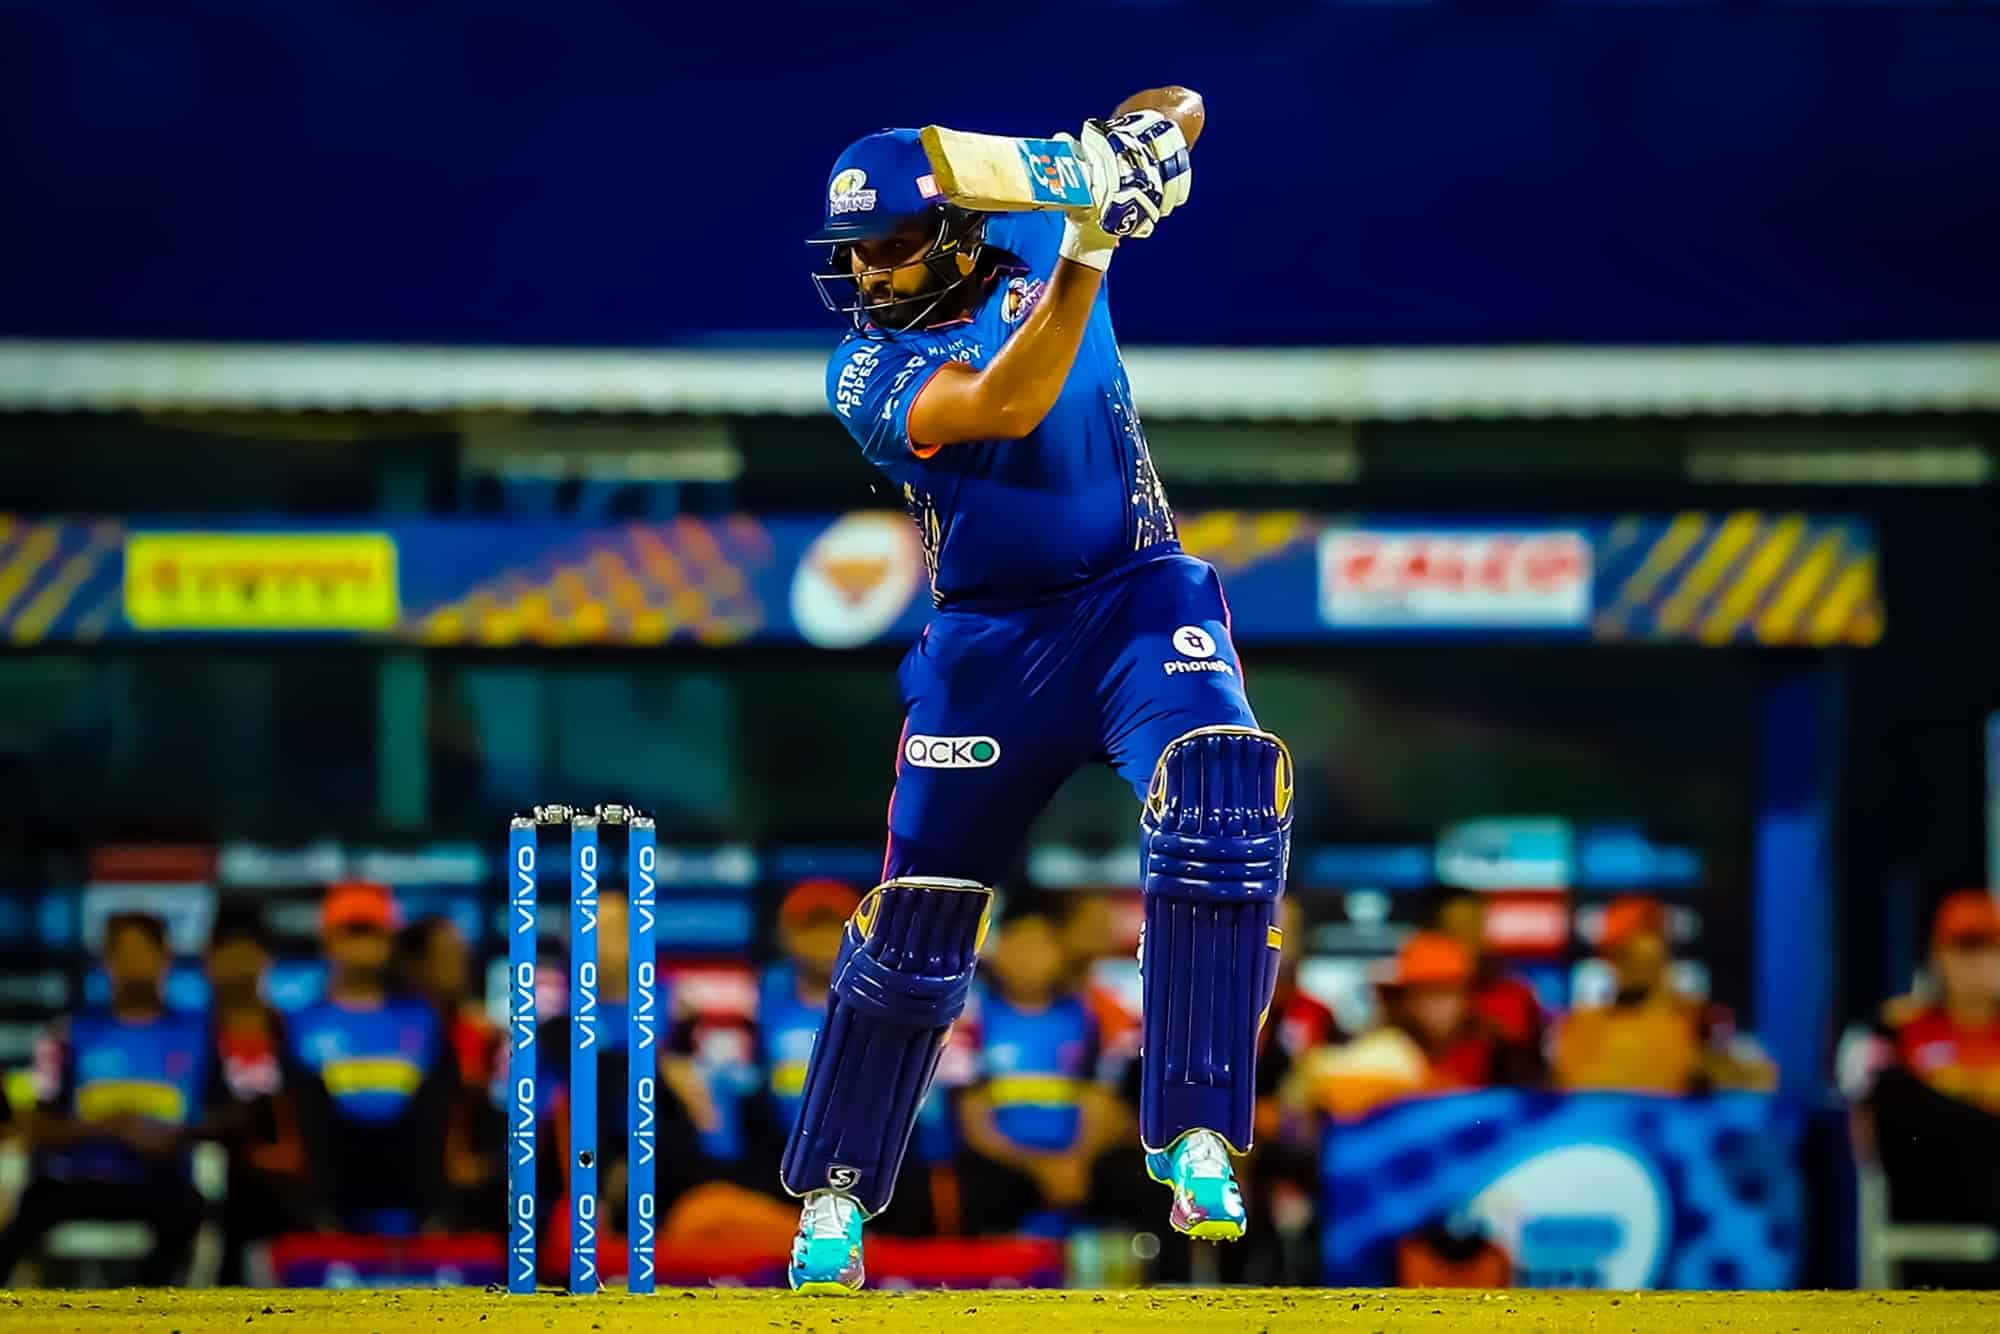 MI vs SRH: Rohit Sharma Surpasses MS Dhoni To Claim Most Sixes In IPL Among Indians